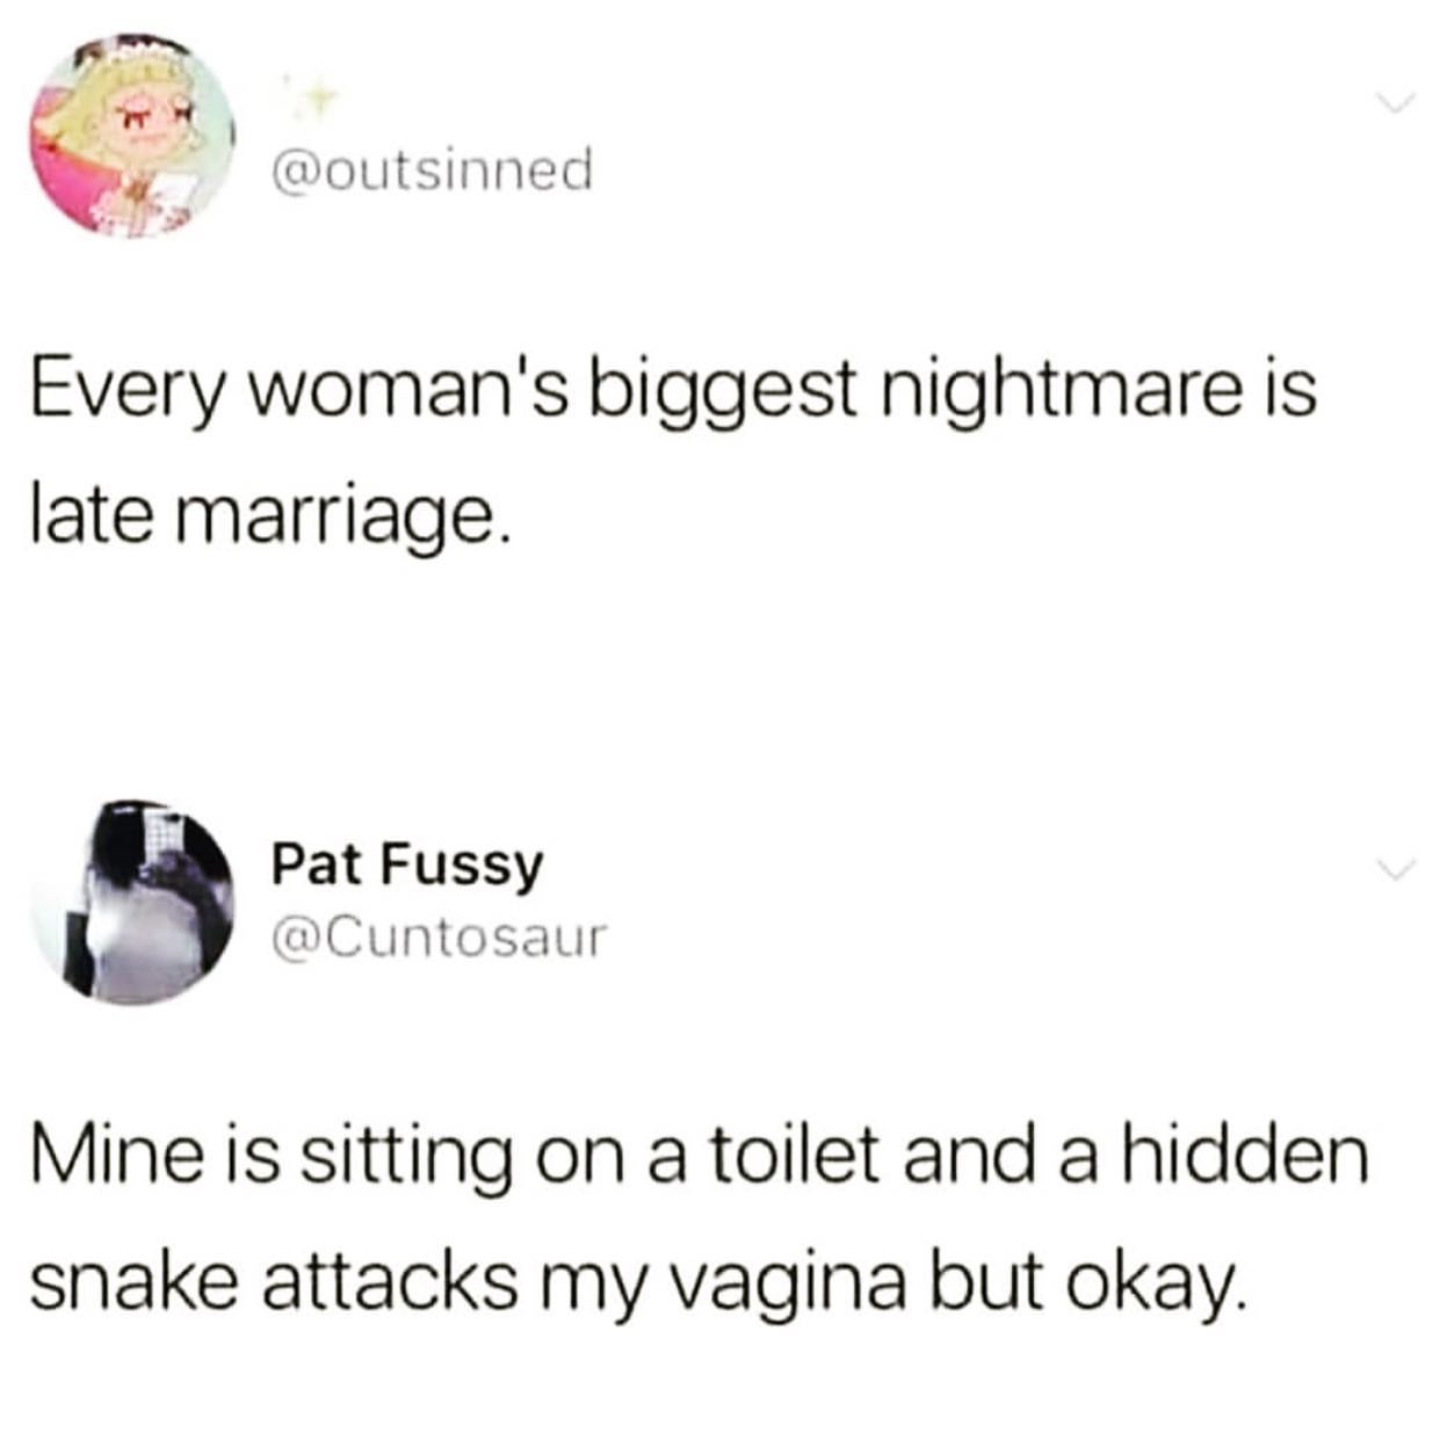 material - Every woman's biggest nightmare is late marriage. Pat Fussy Mine is sitting on a toilet and a hidden snake attacks my vagina but okay.